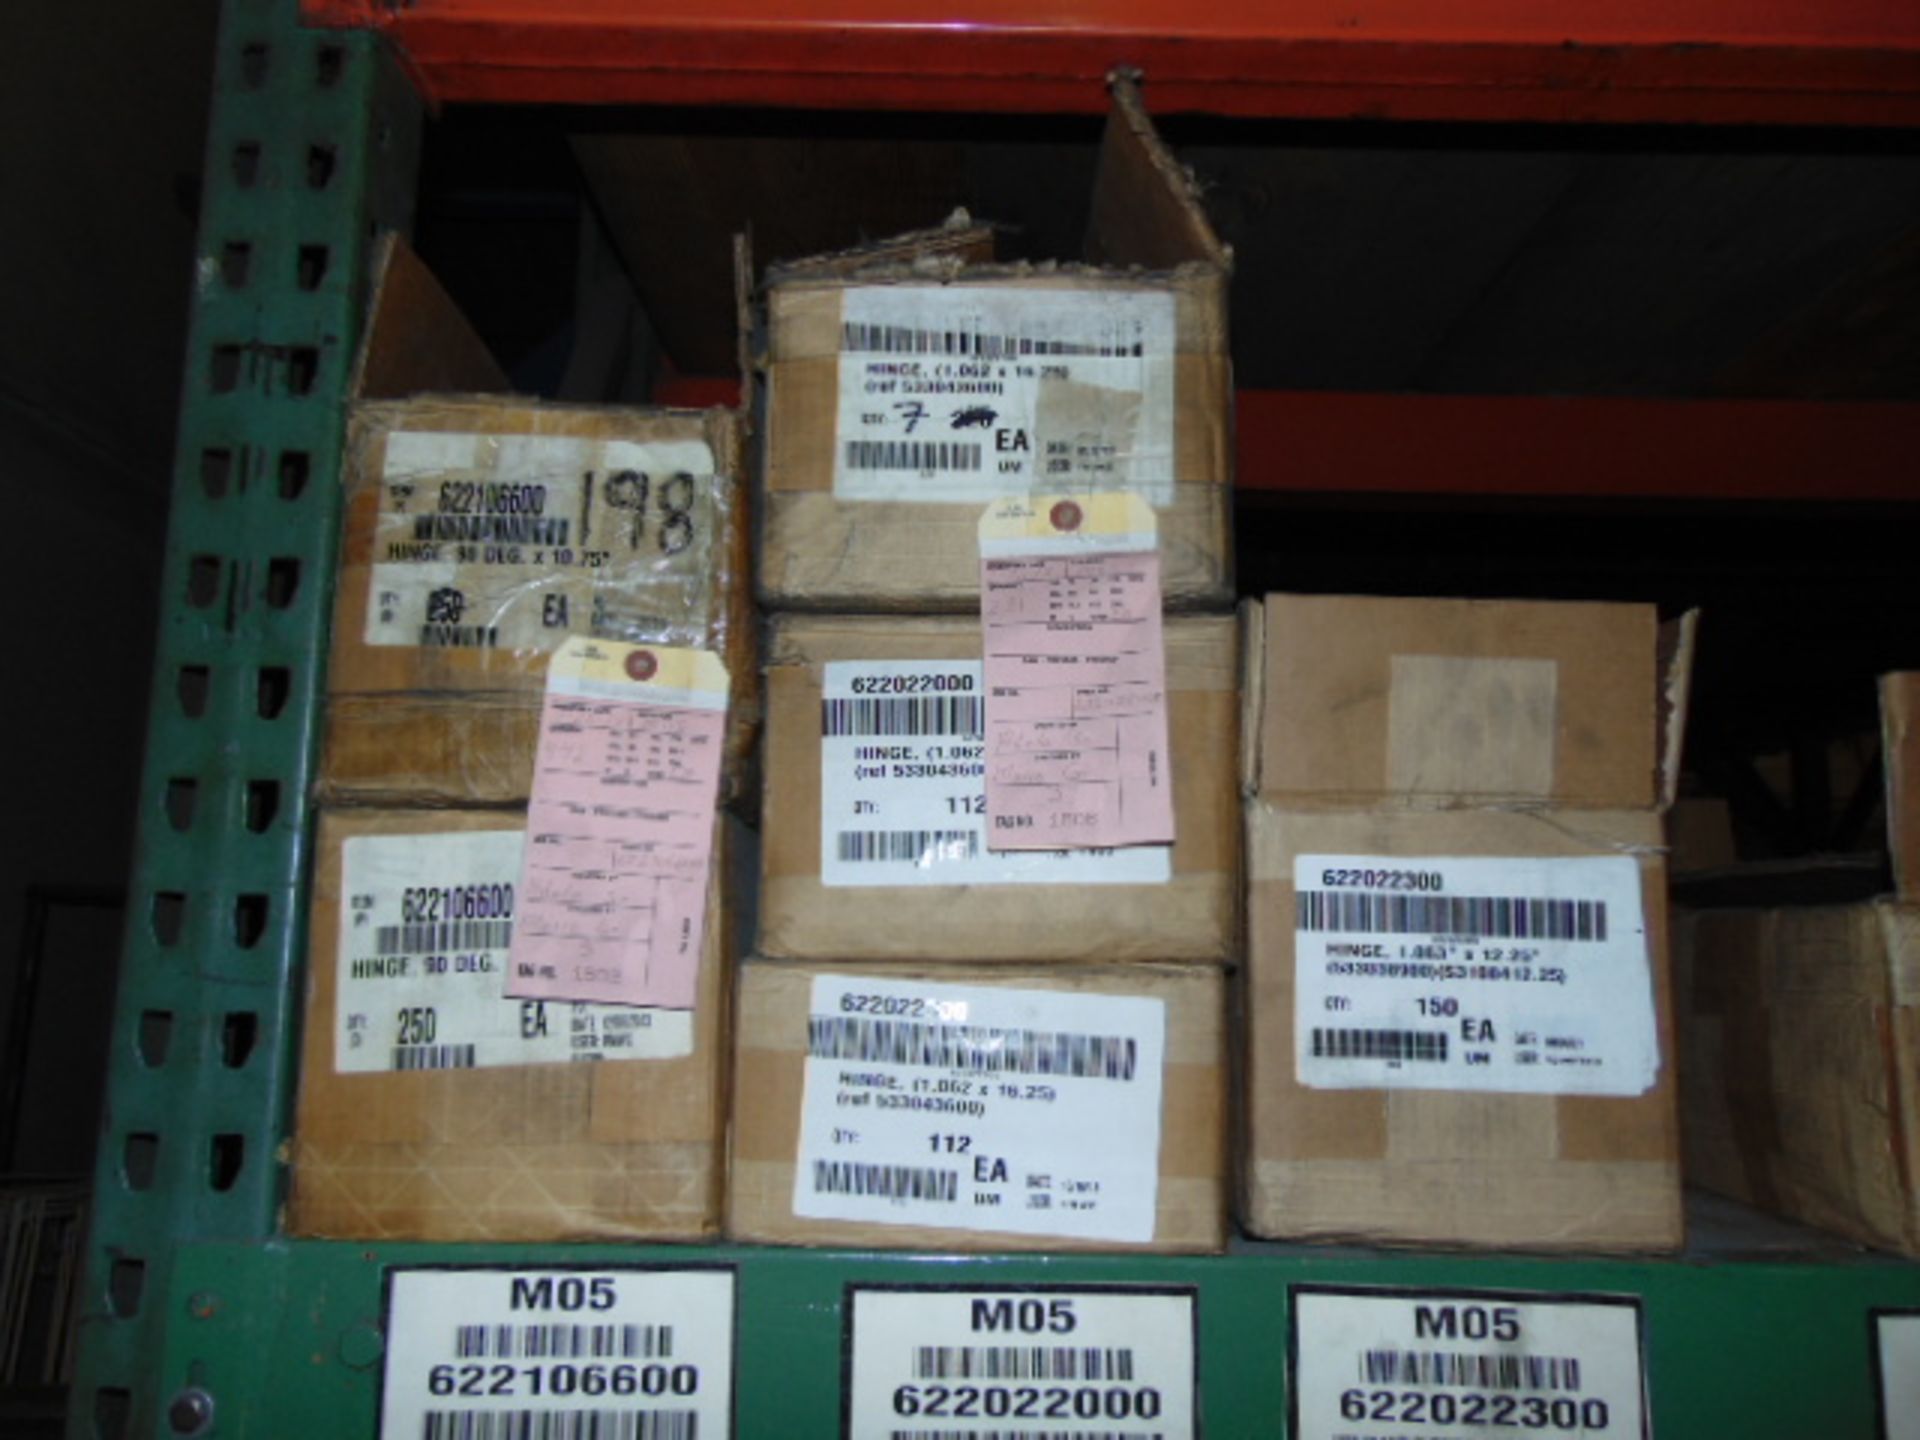 LOT CONSISTING OF: steel hinges & misc. steel components (in two racks & on floor) - Image 8 of 10